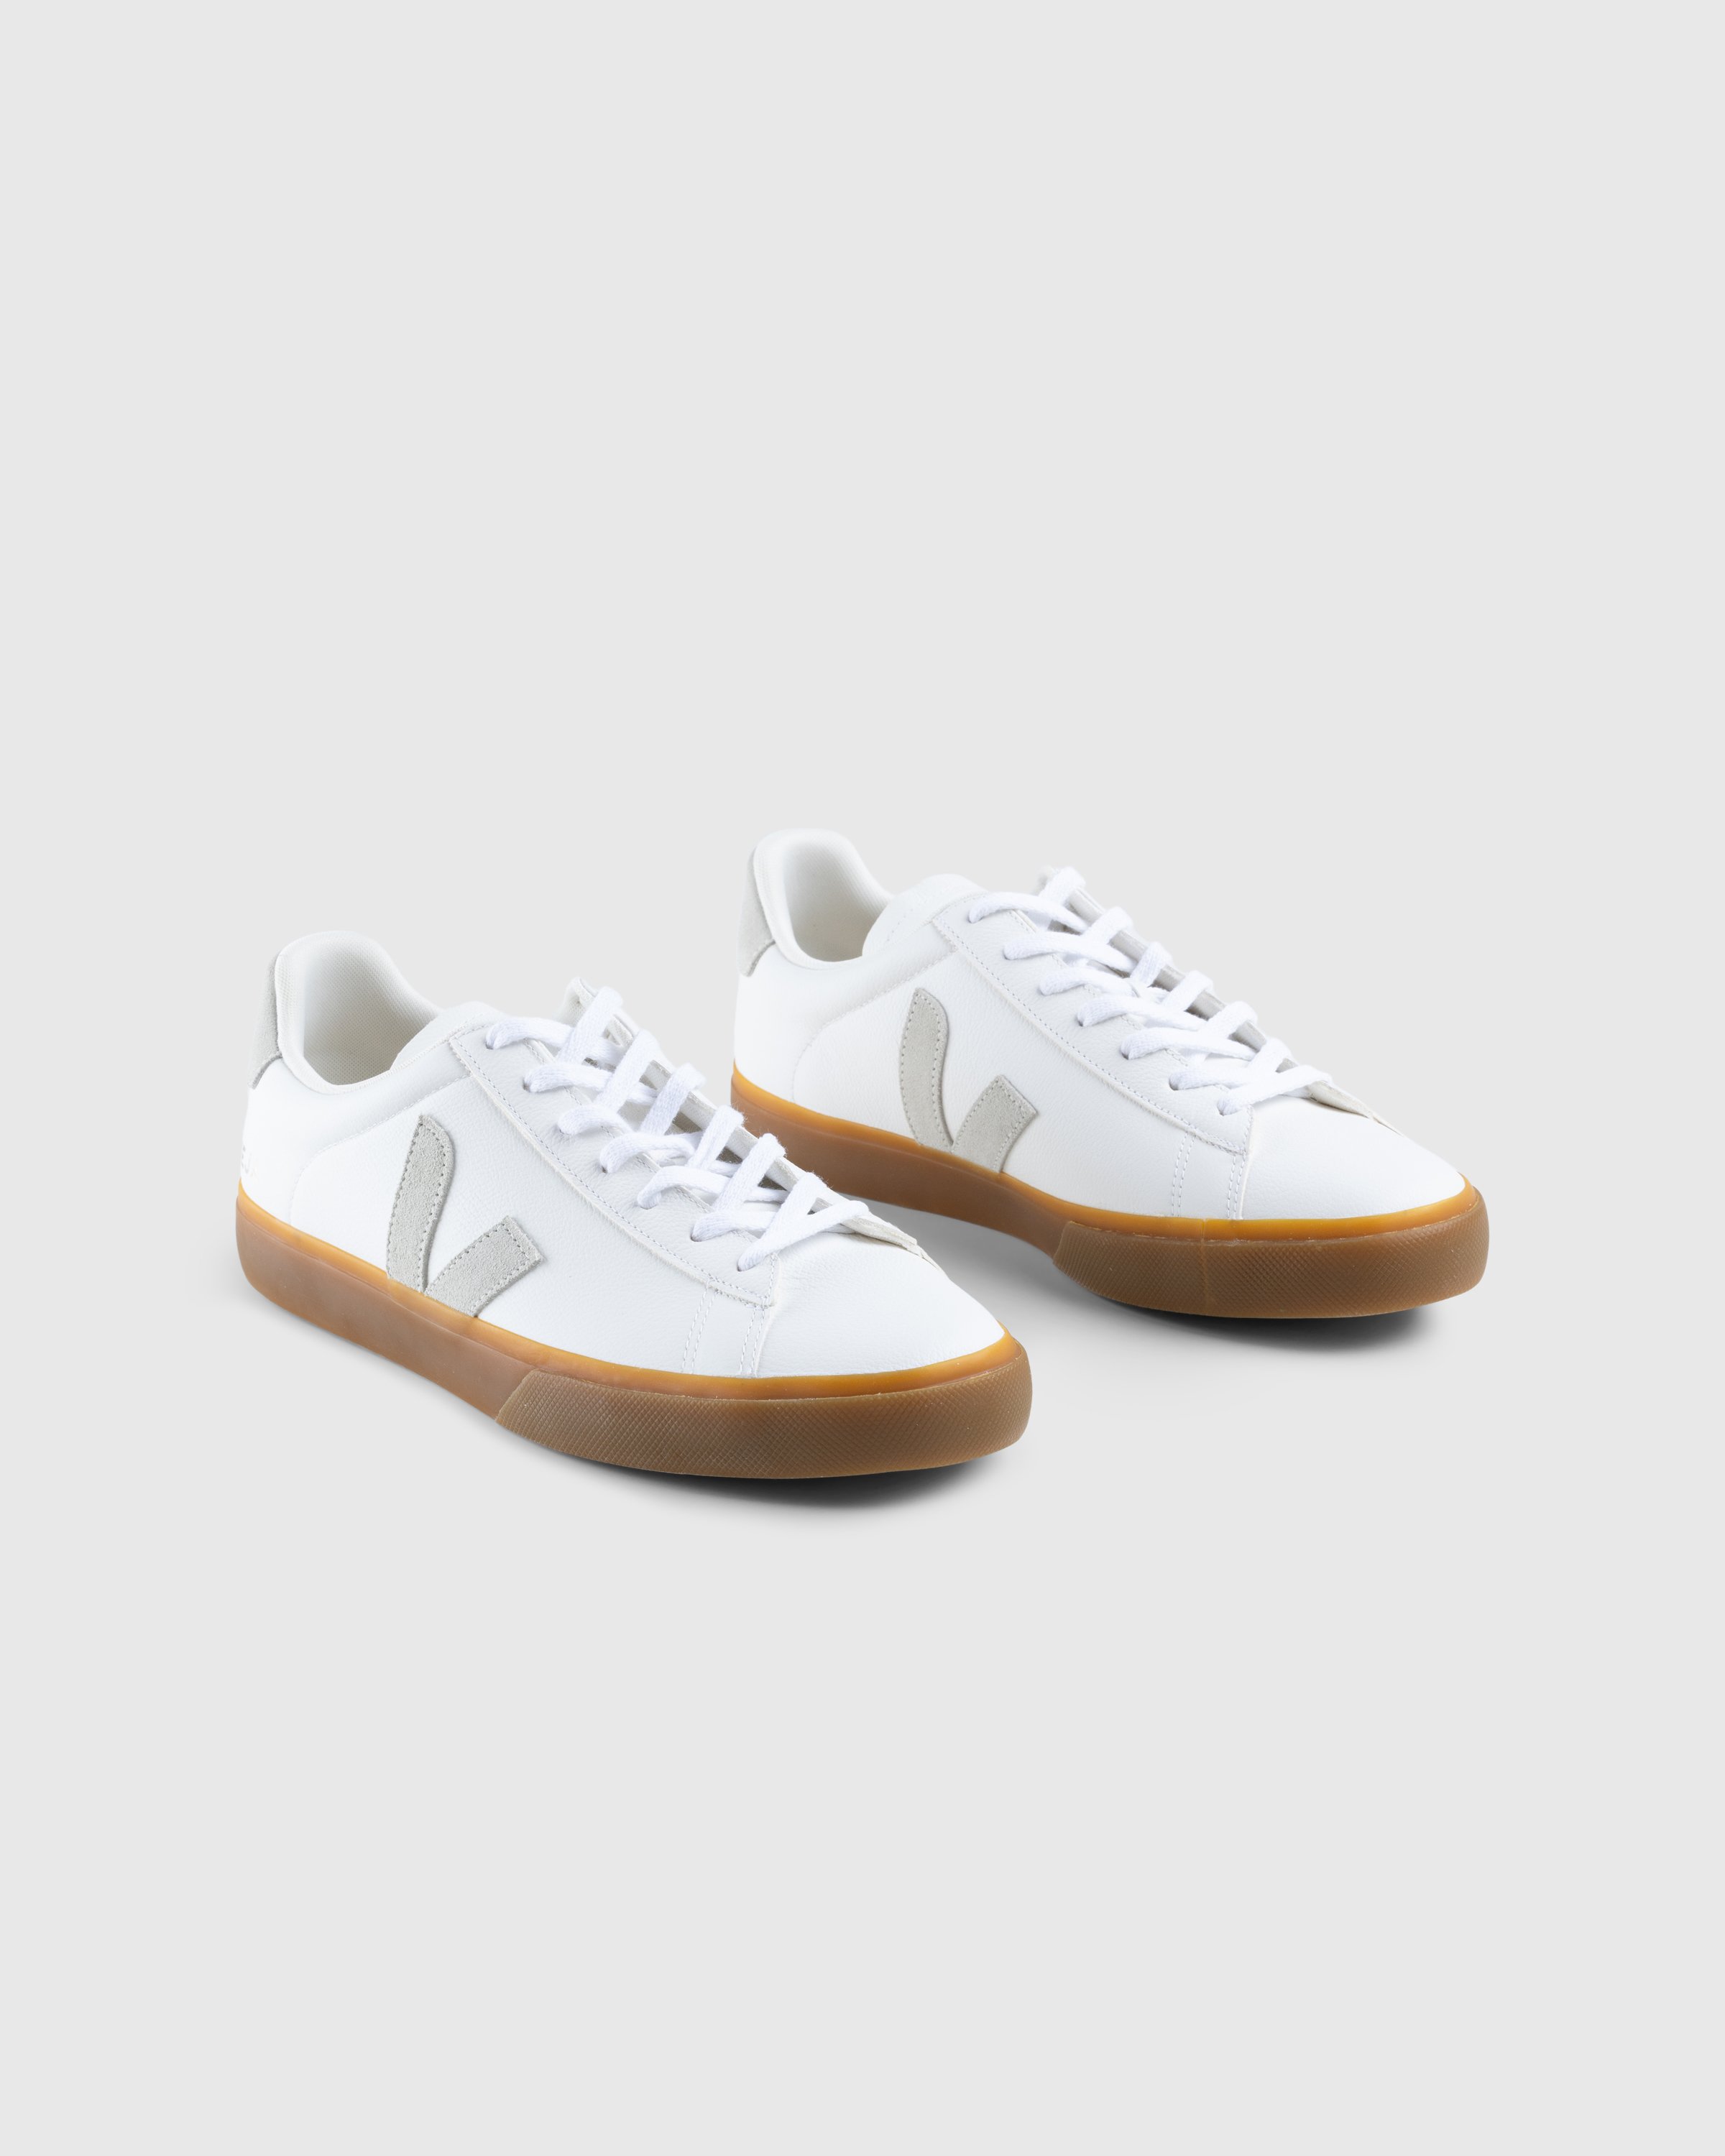 VEJA - Campo White/Natural - Footwear - White - Image 3